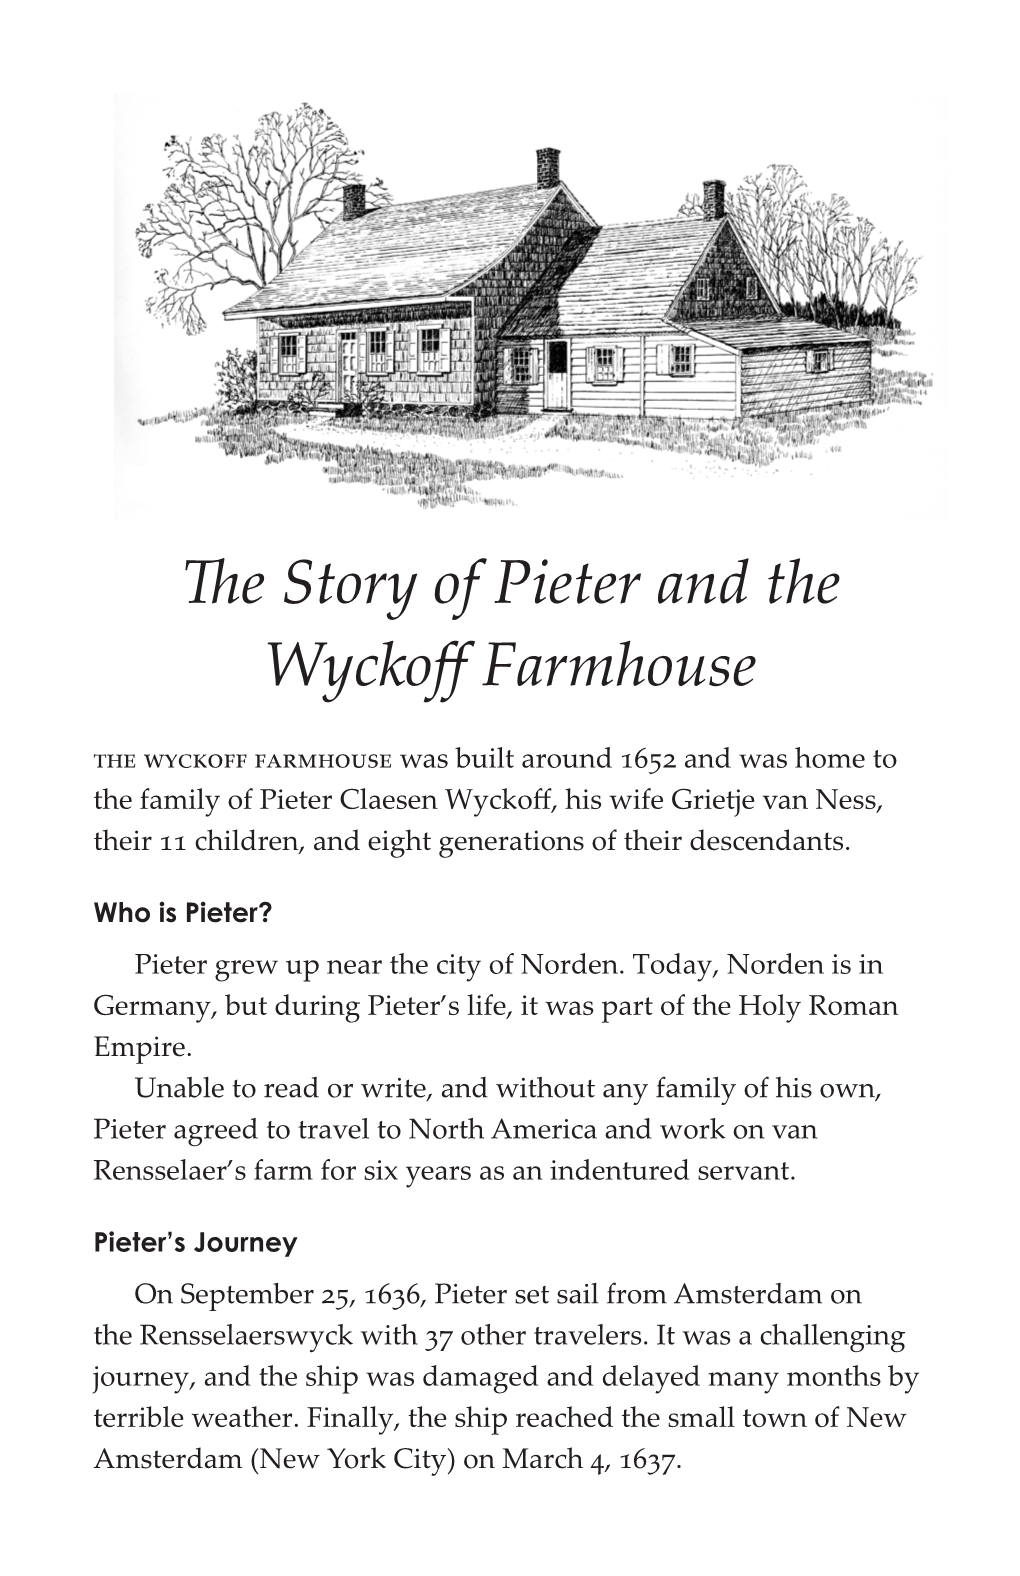 The Story of Pieter and the Wyckoff Farmhouse